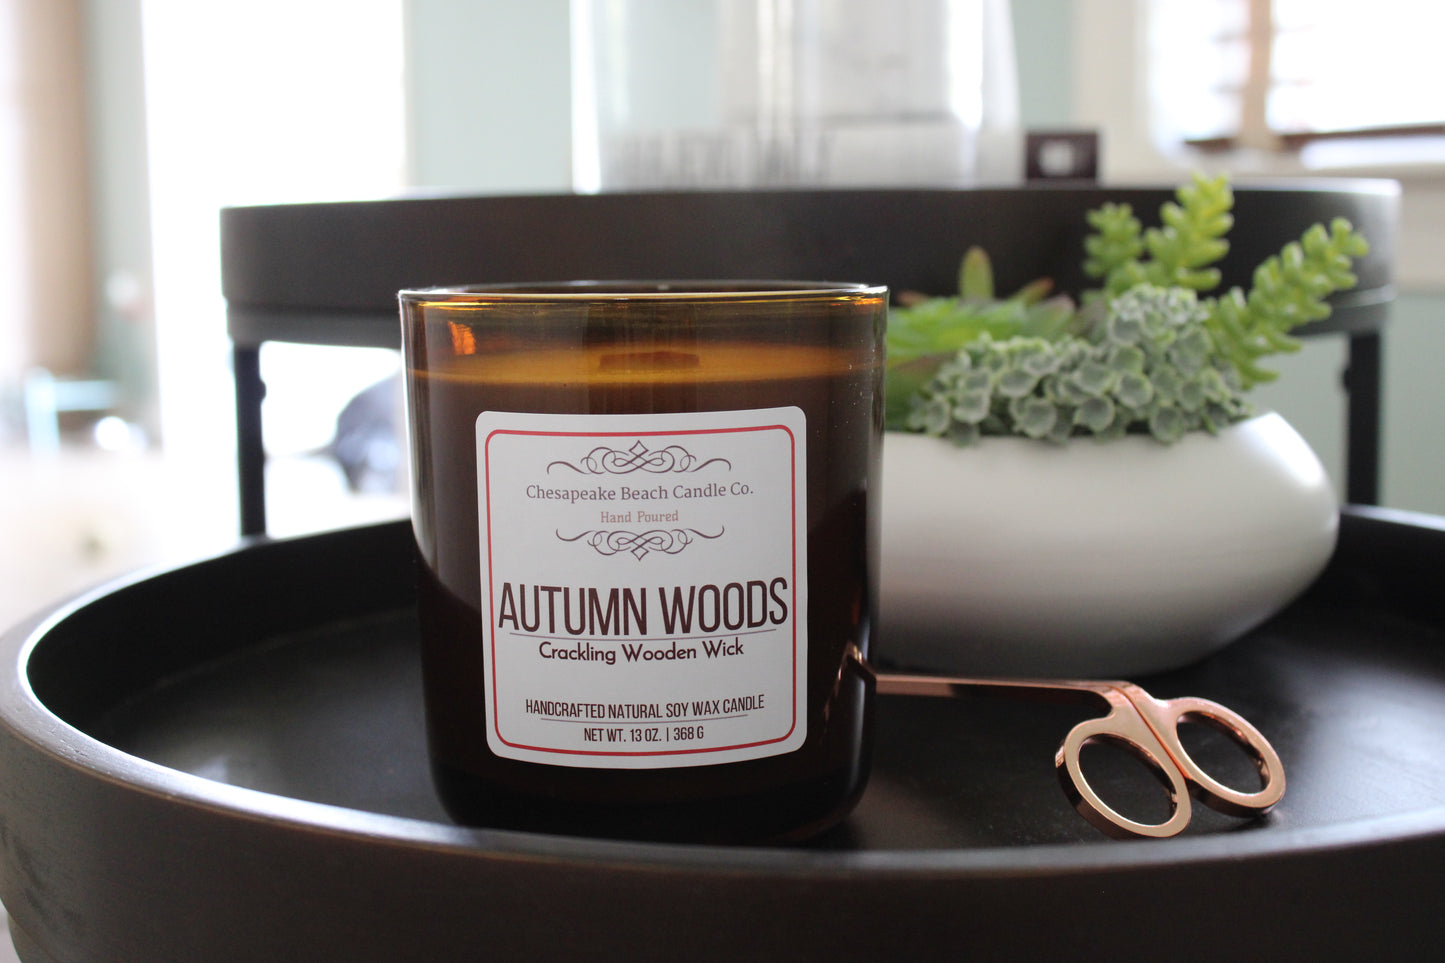 Autumn Woods Wooden Wick Candle (13 oz)